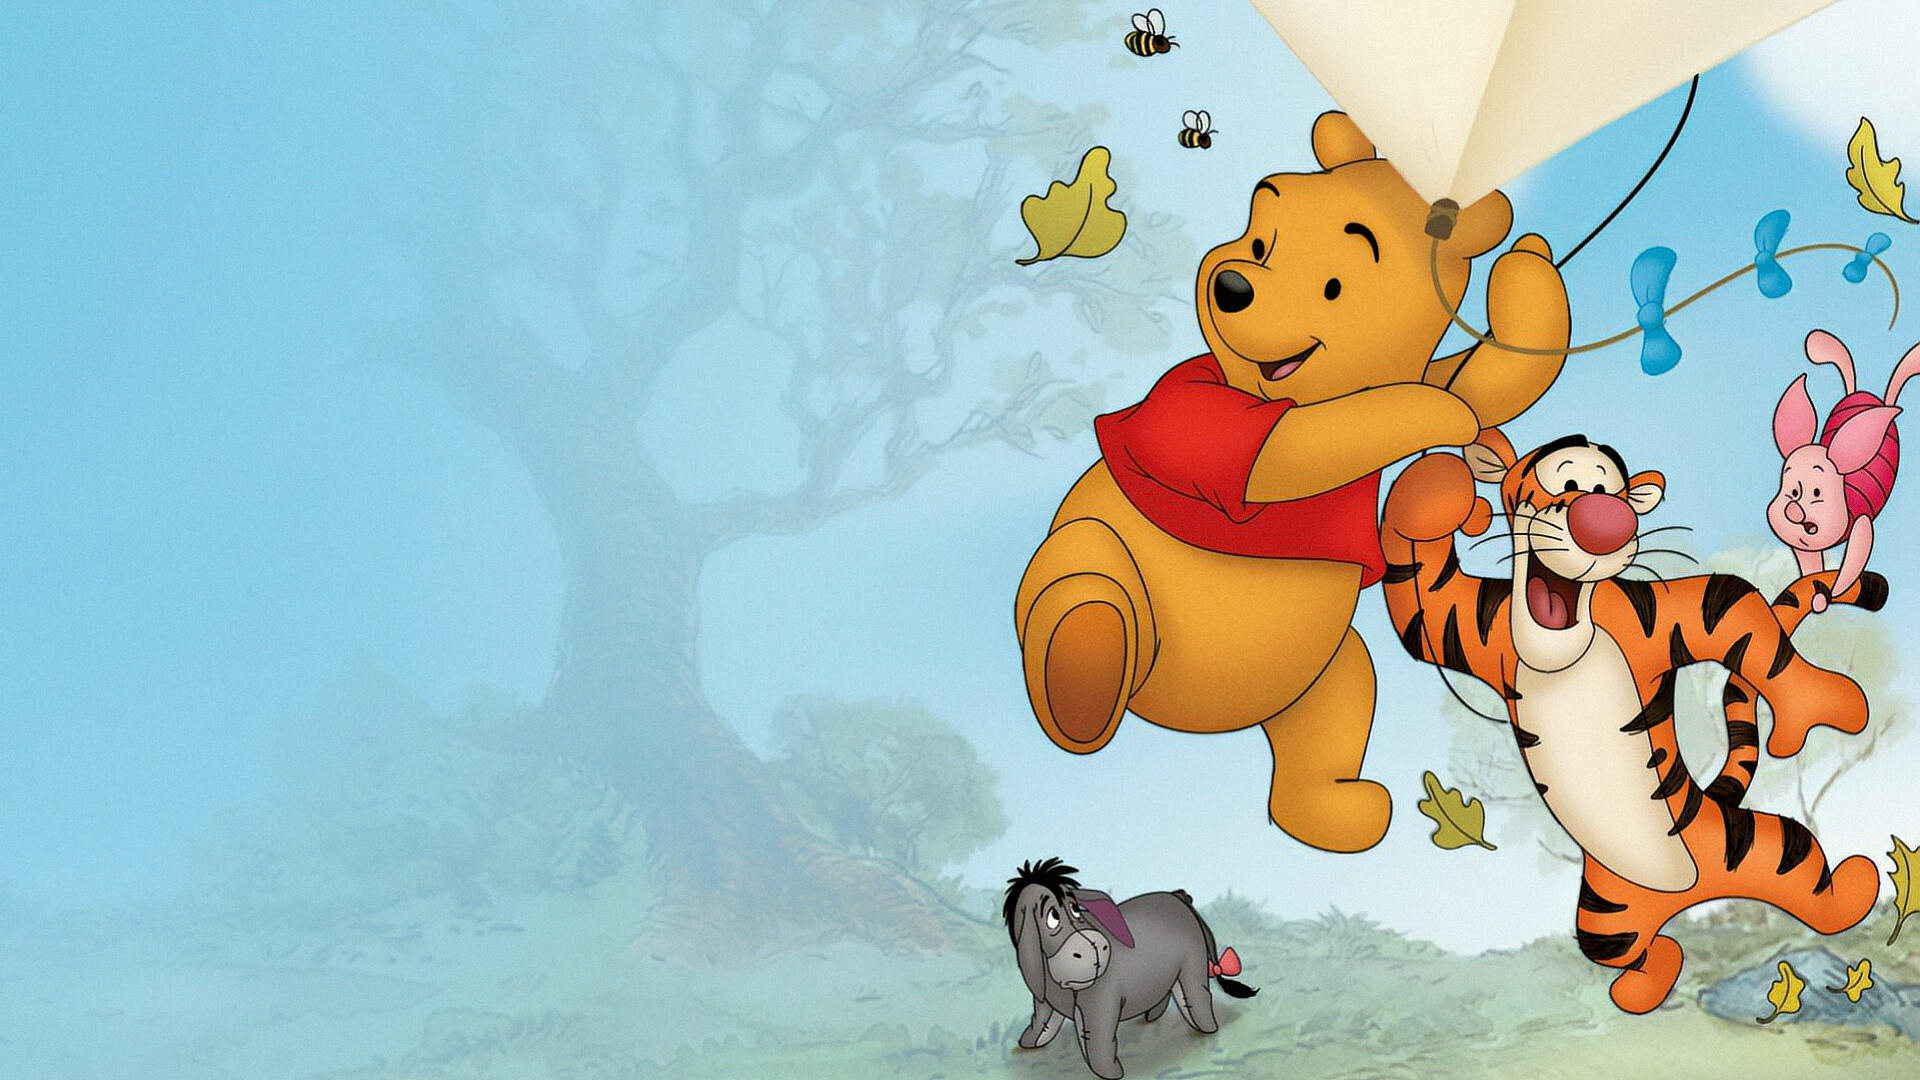 The Many Adventures of Winnie the Pooh: Released in 1977, this musical anthology is comprised of three previously released animated featurettes, Animated cartoon. 1920x1080 Full HD Background.